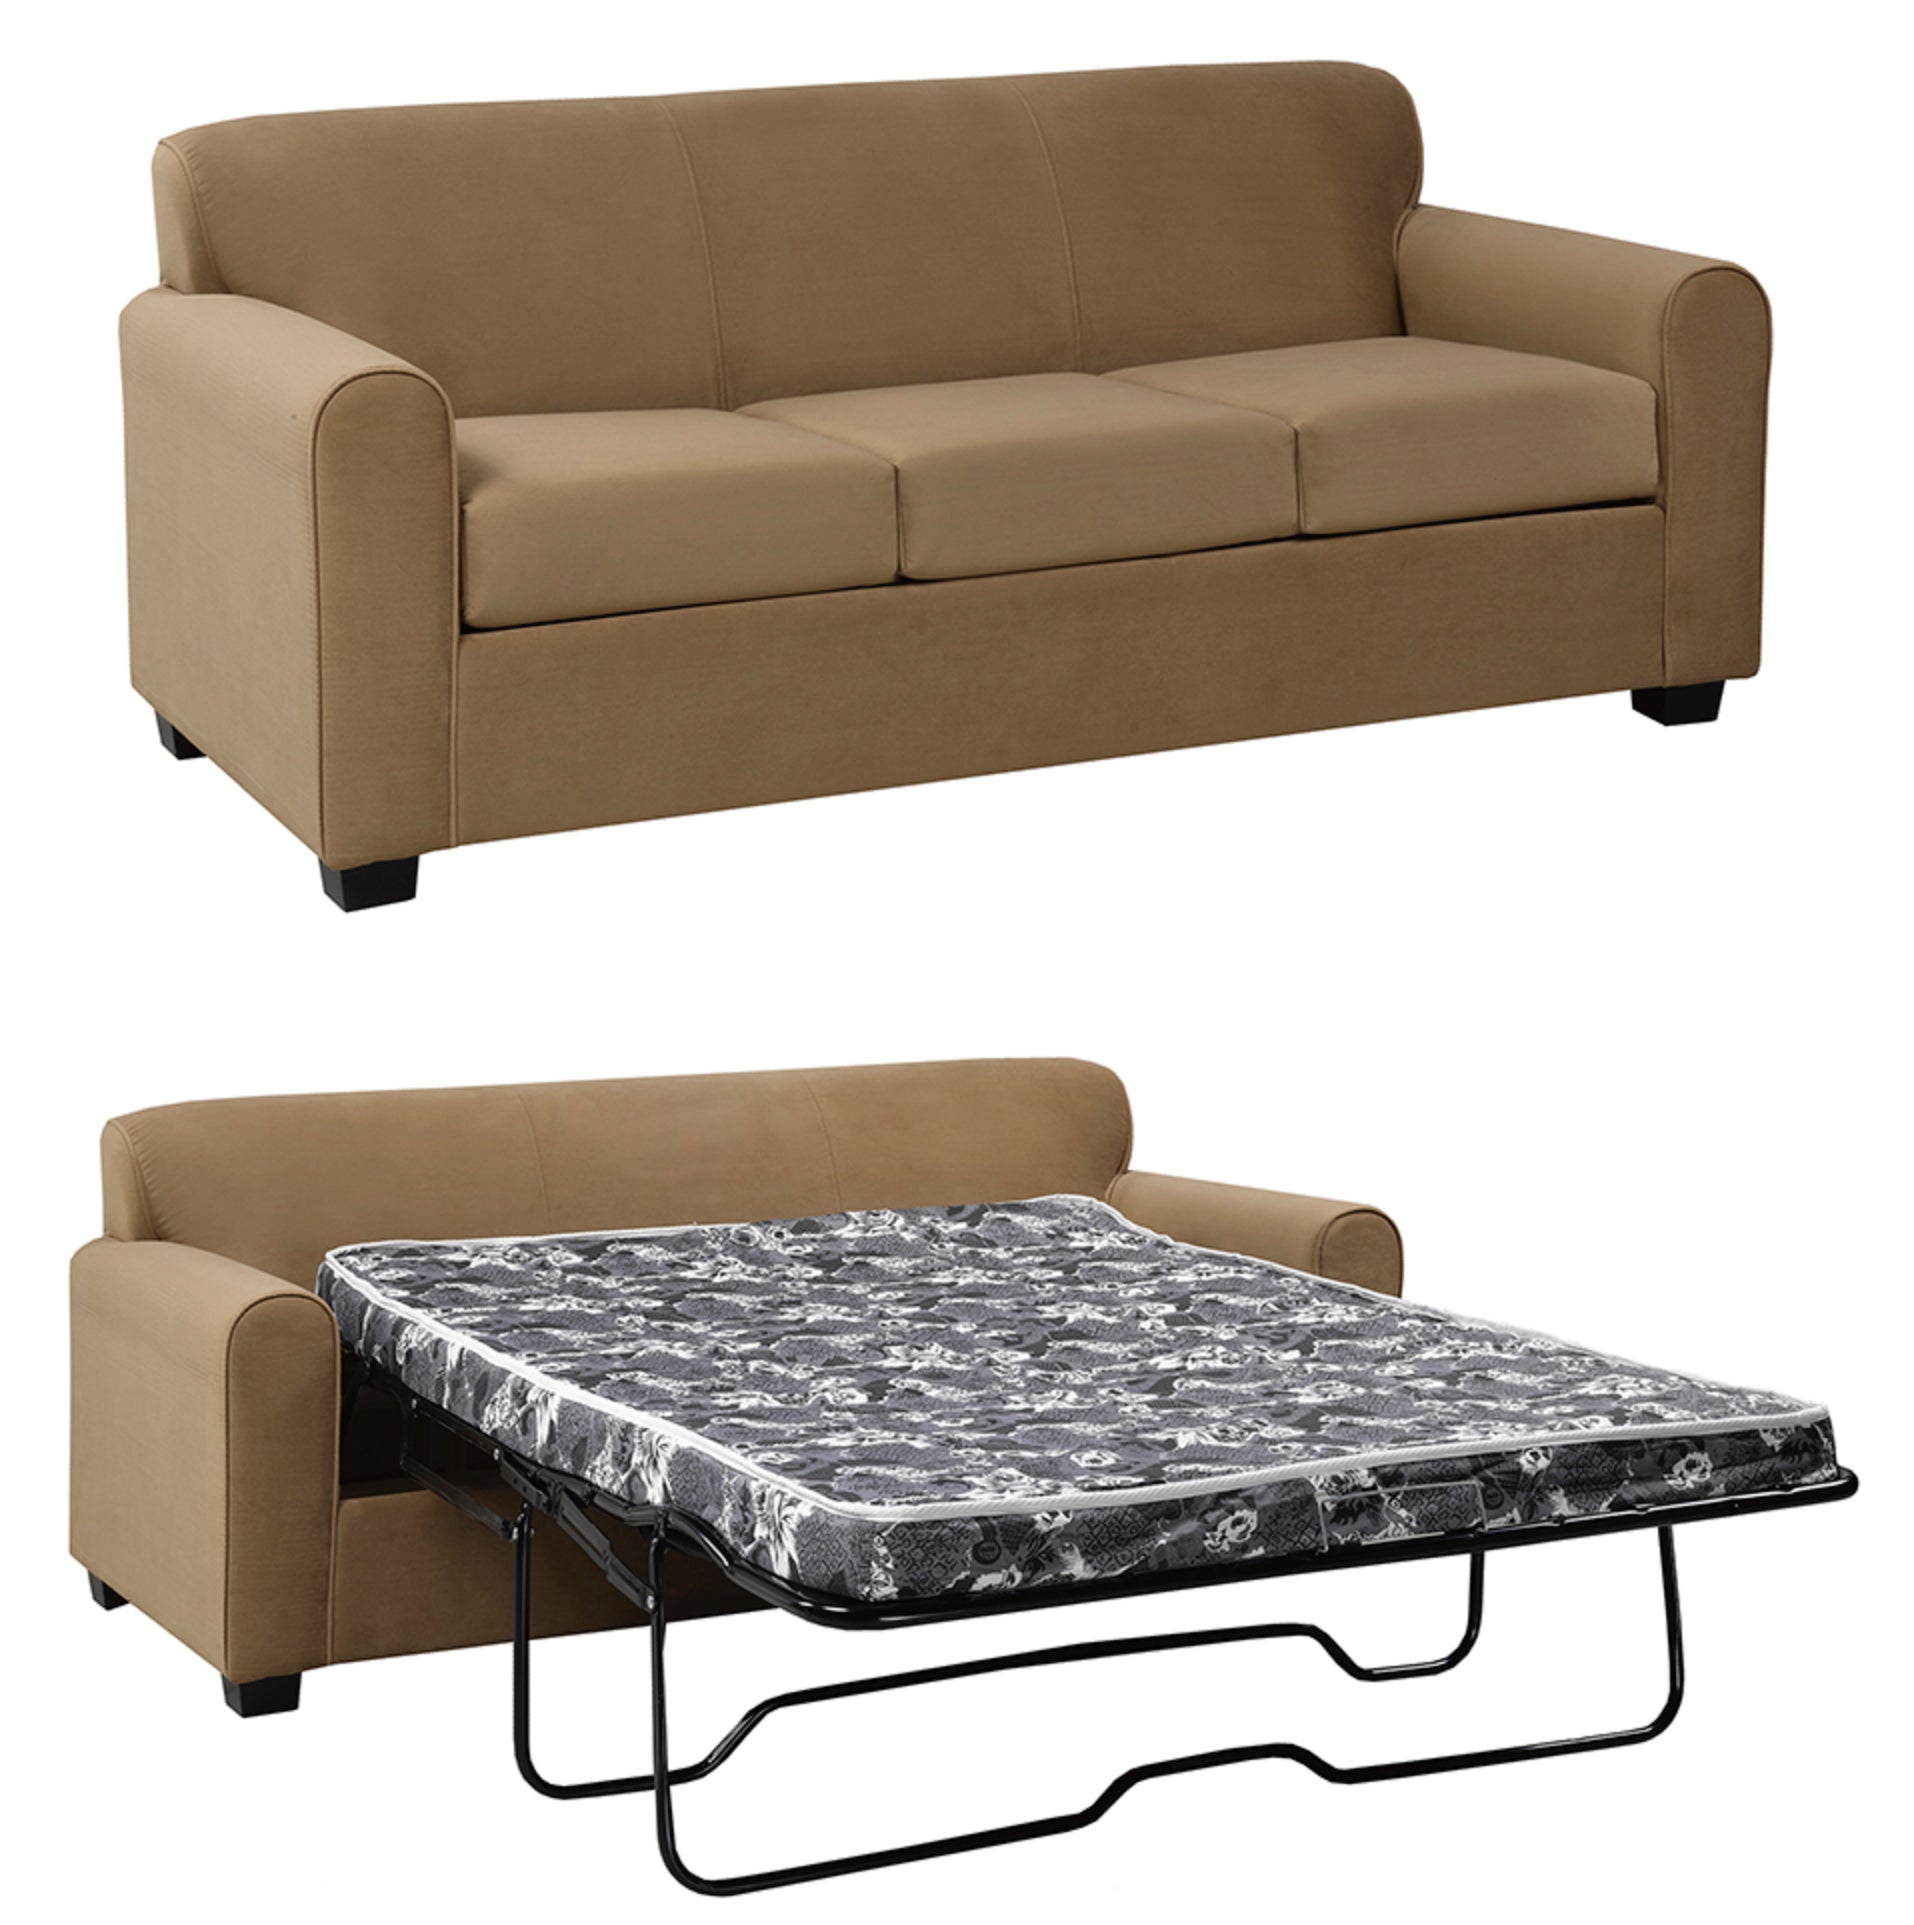 Troy Double Sofa Bed - Tan